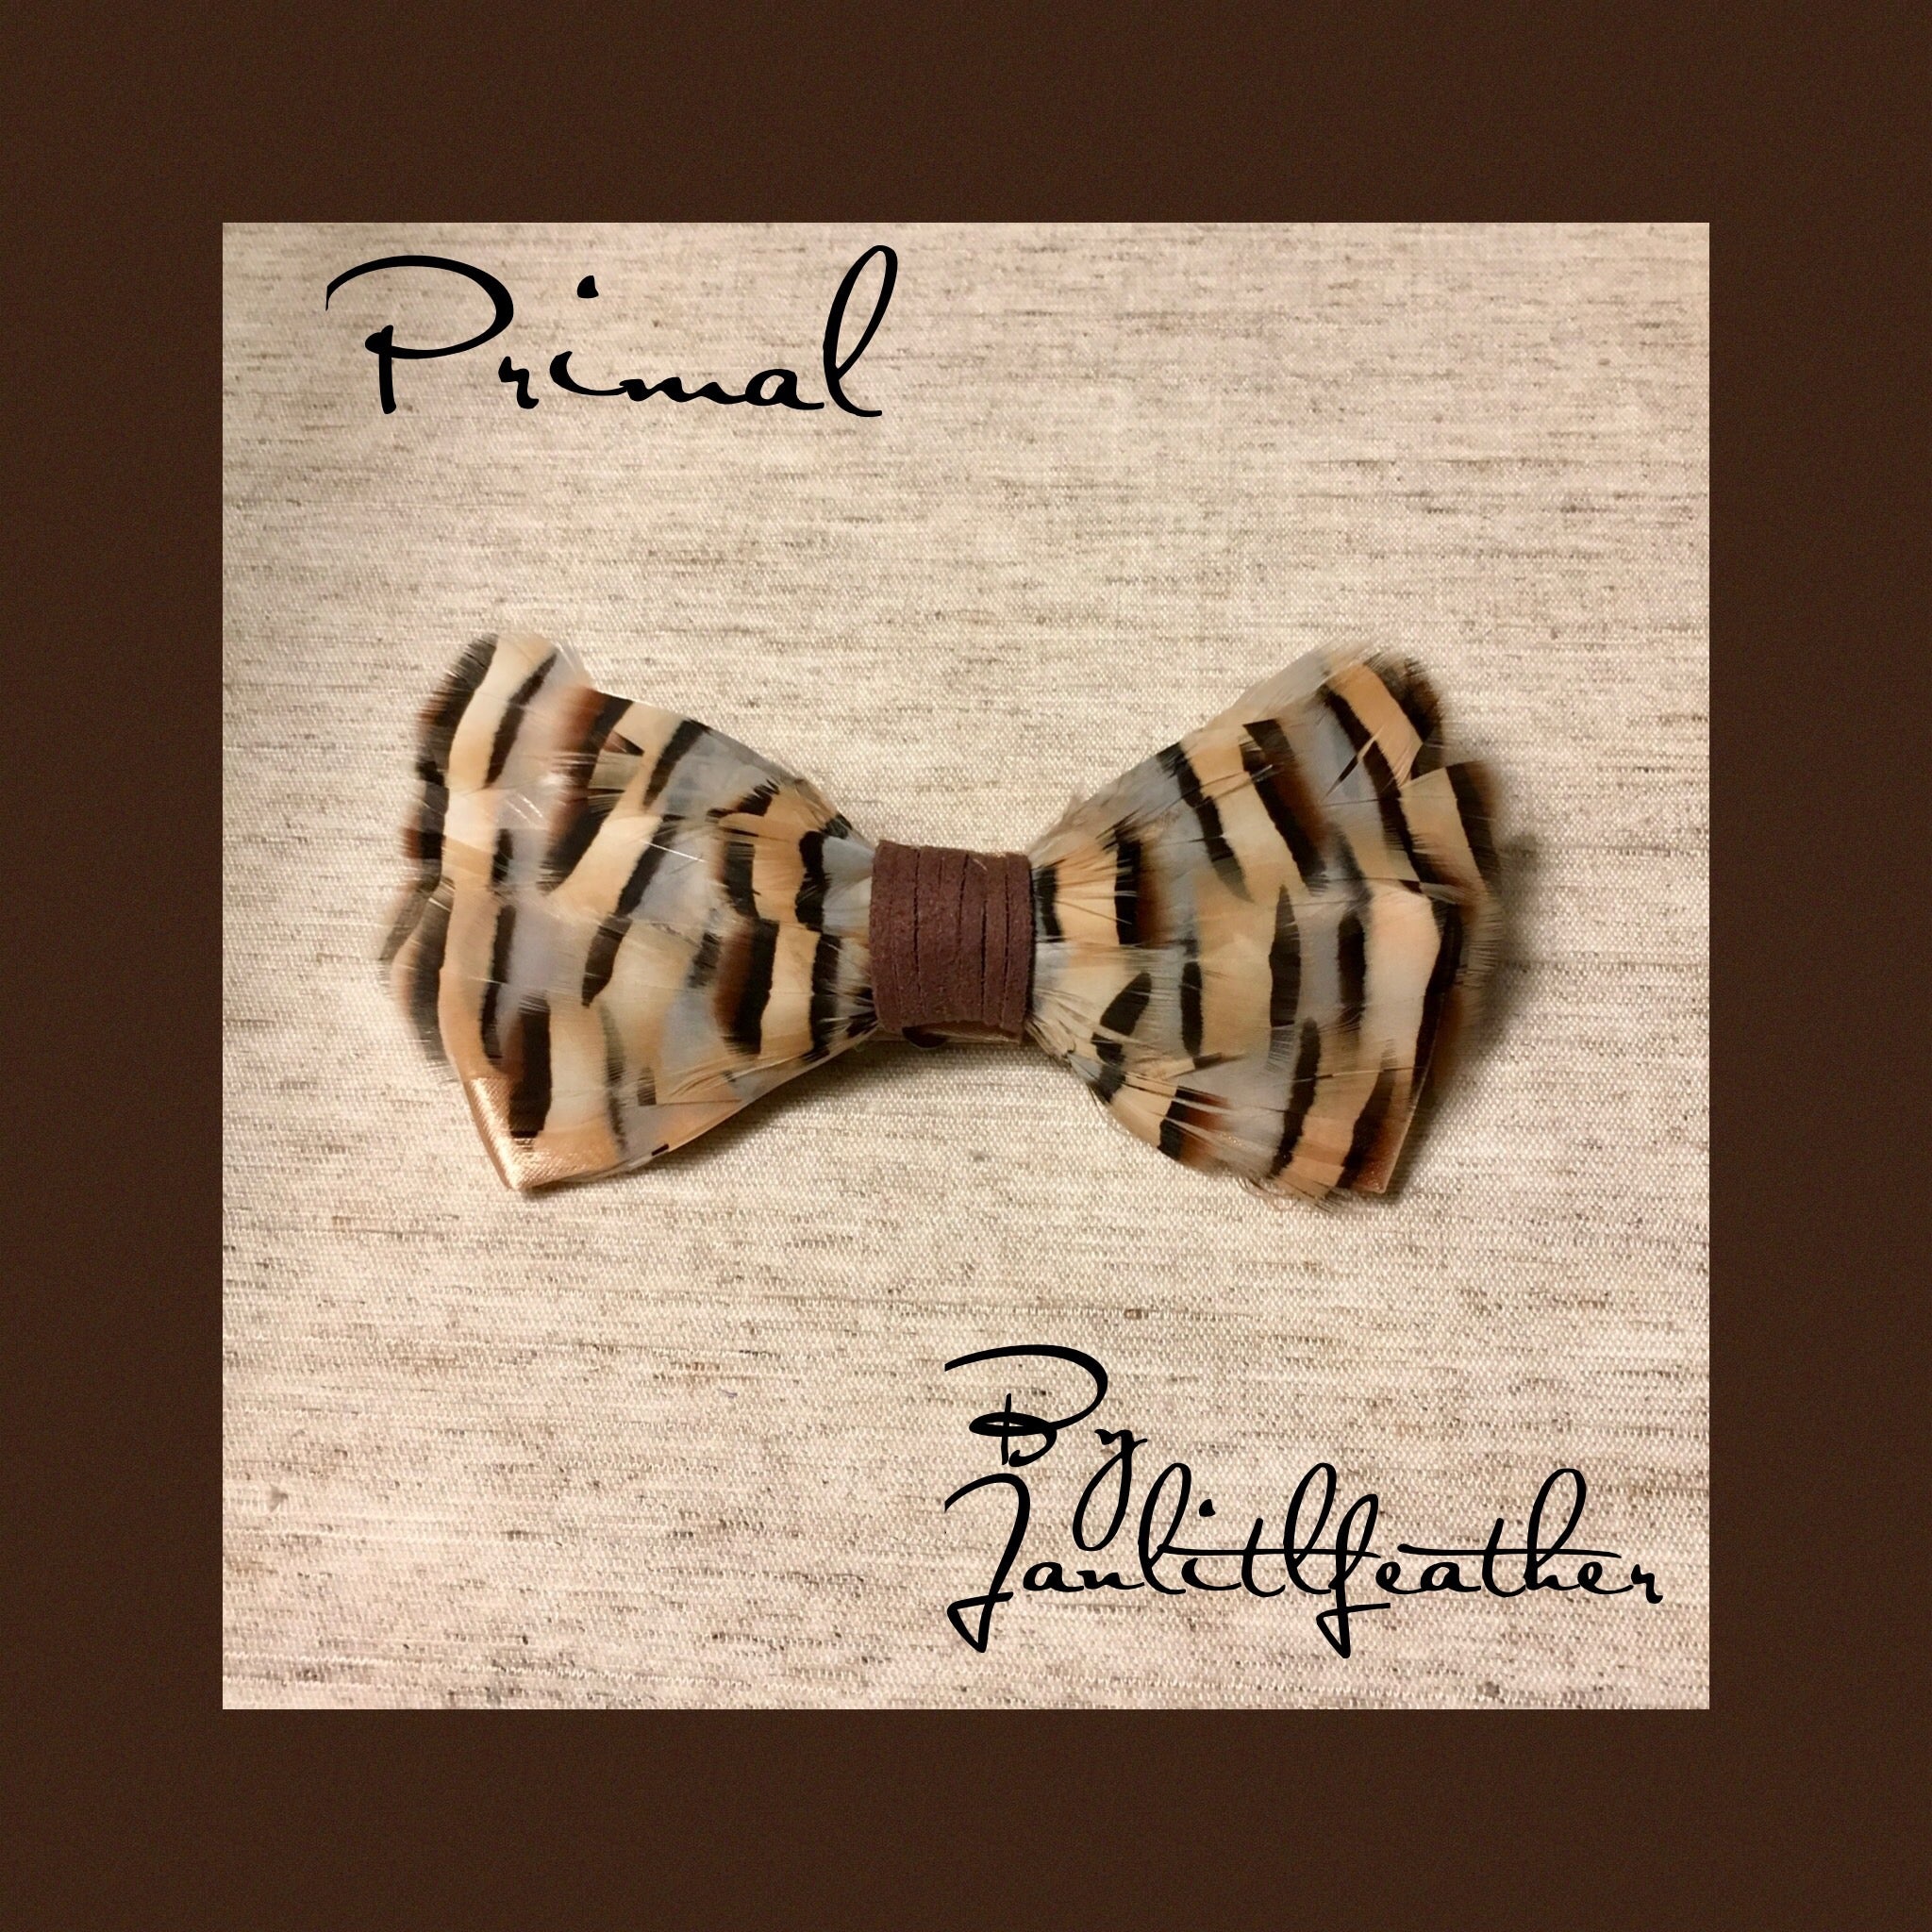 Primal Feather Bow tie – Janlitlfeather